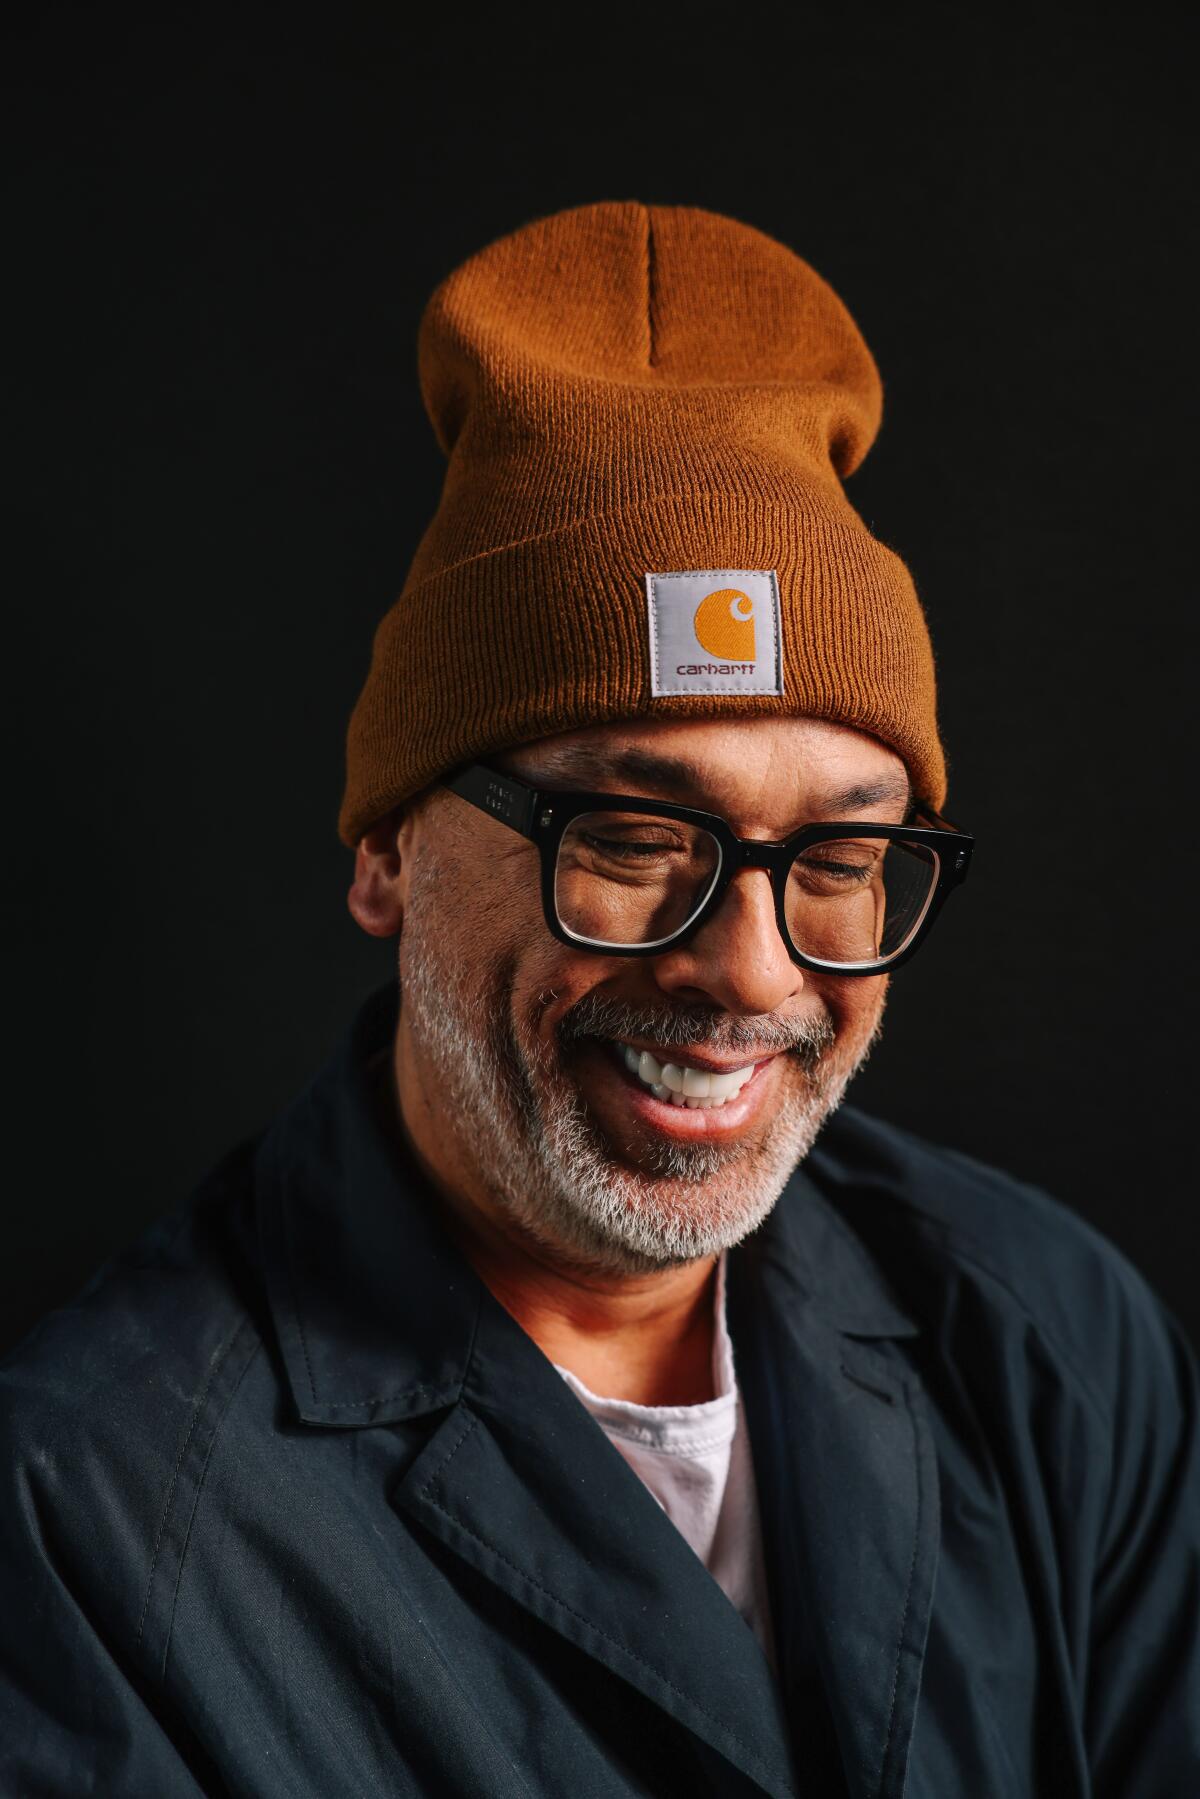 A man wearing a beanie and glasses smiles.